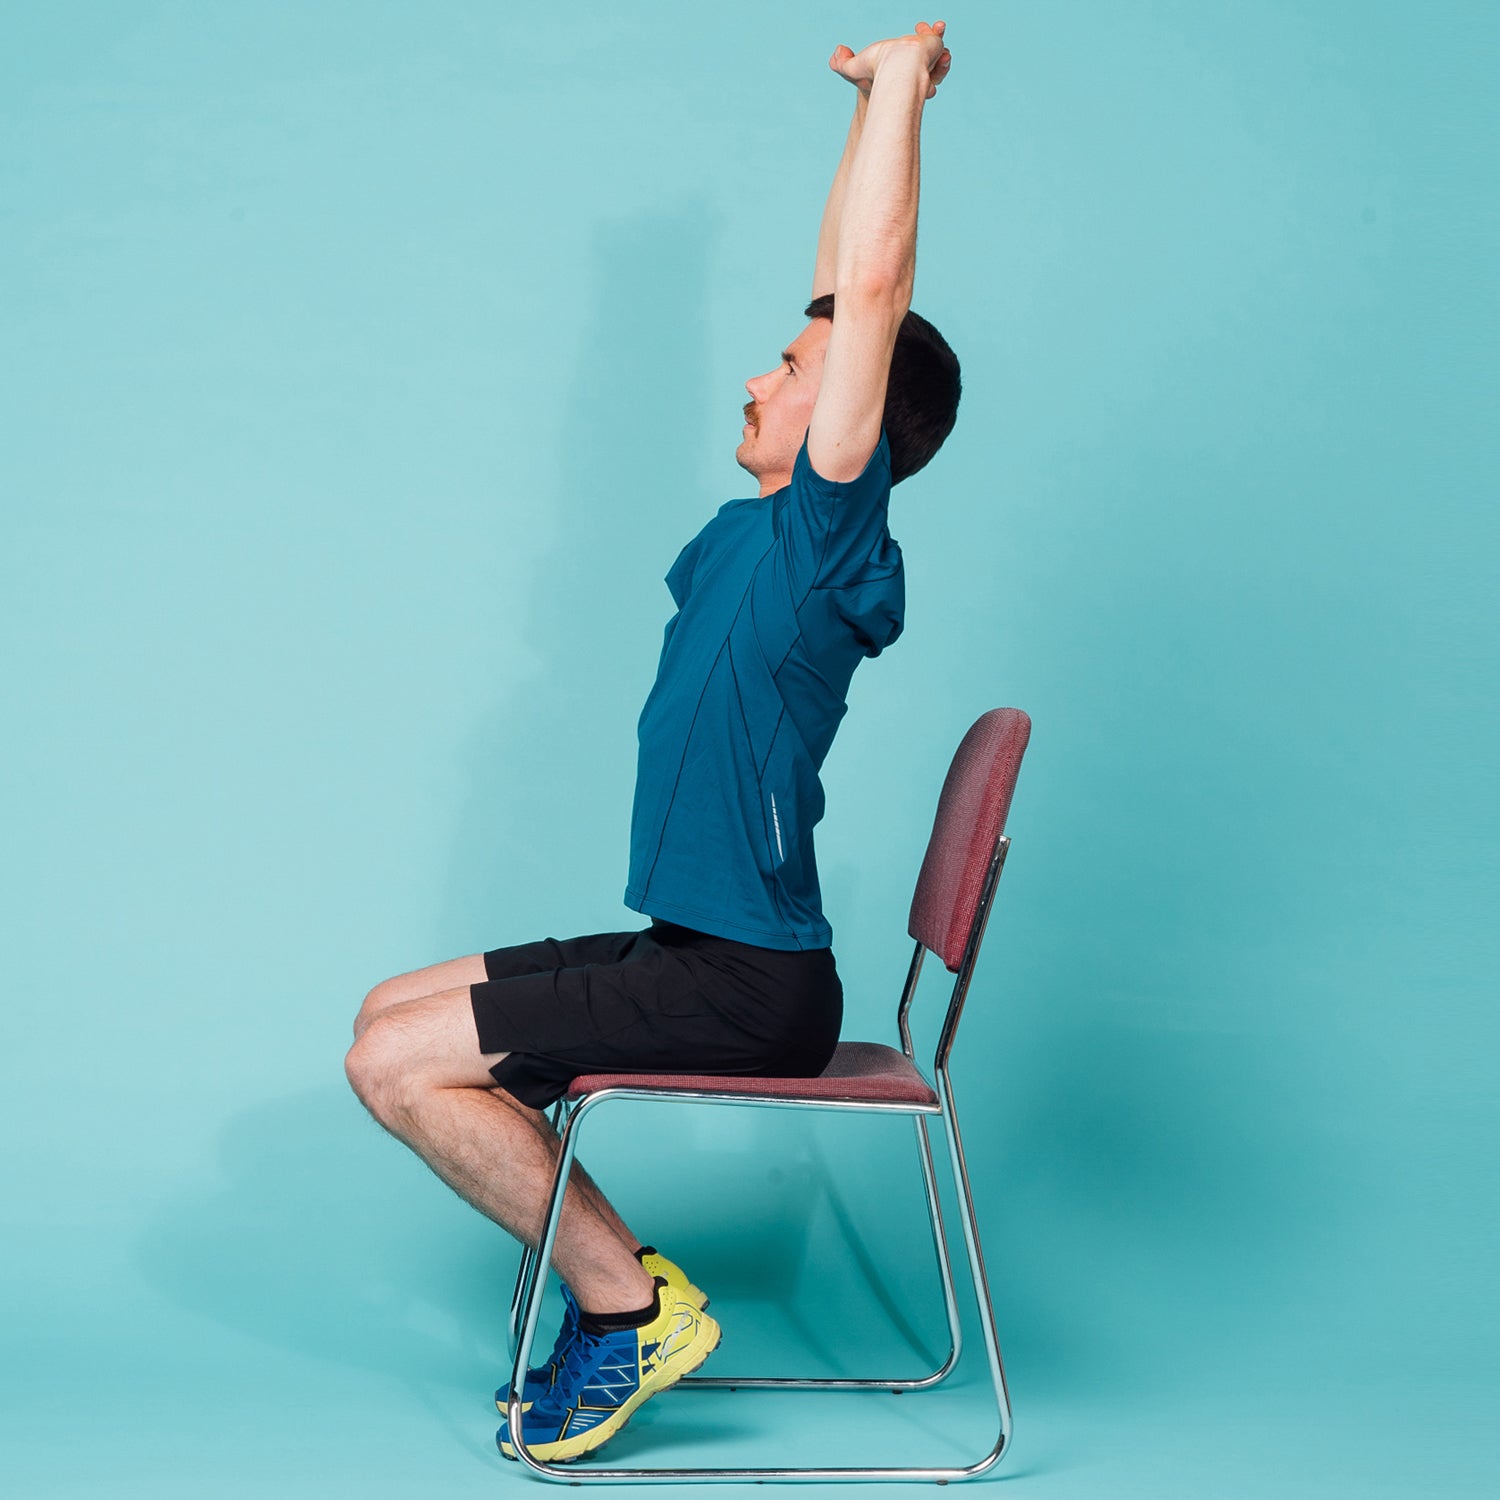 A 10-Minute Stretching Routine to Counteract Sitting